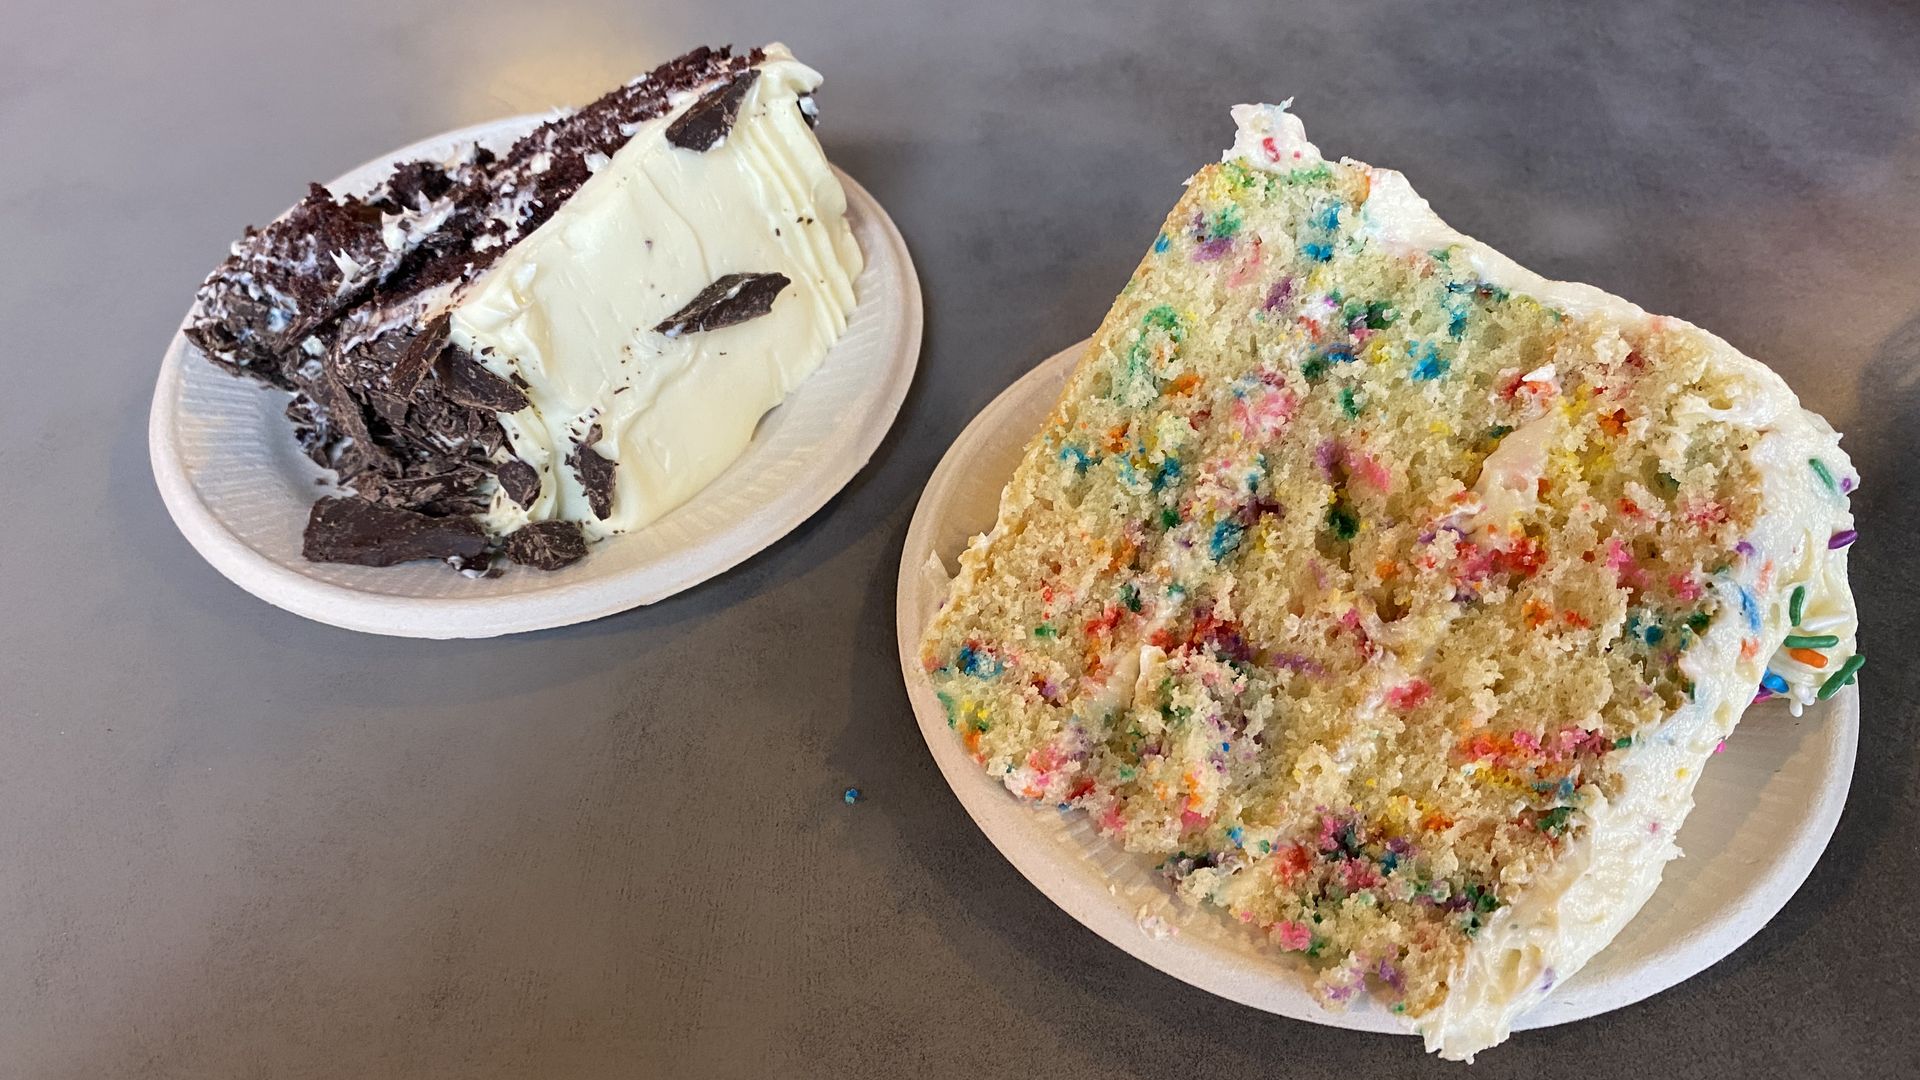 A slice of chocolate cake with white frosting on a paper plate at left, at right a slice of vanilla cake with rainbow sprinkles baked in, plus white frosting with sprinkles